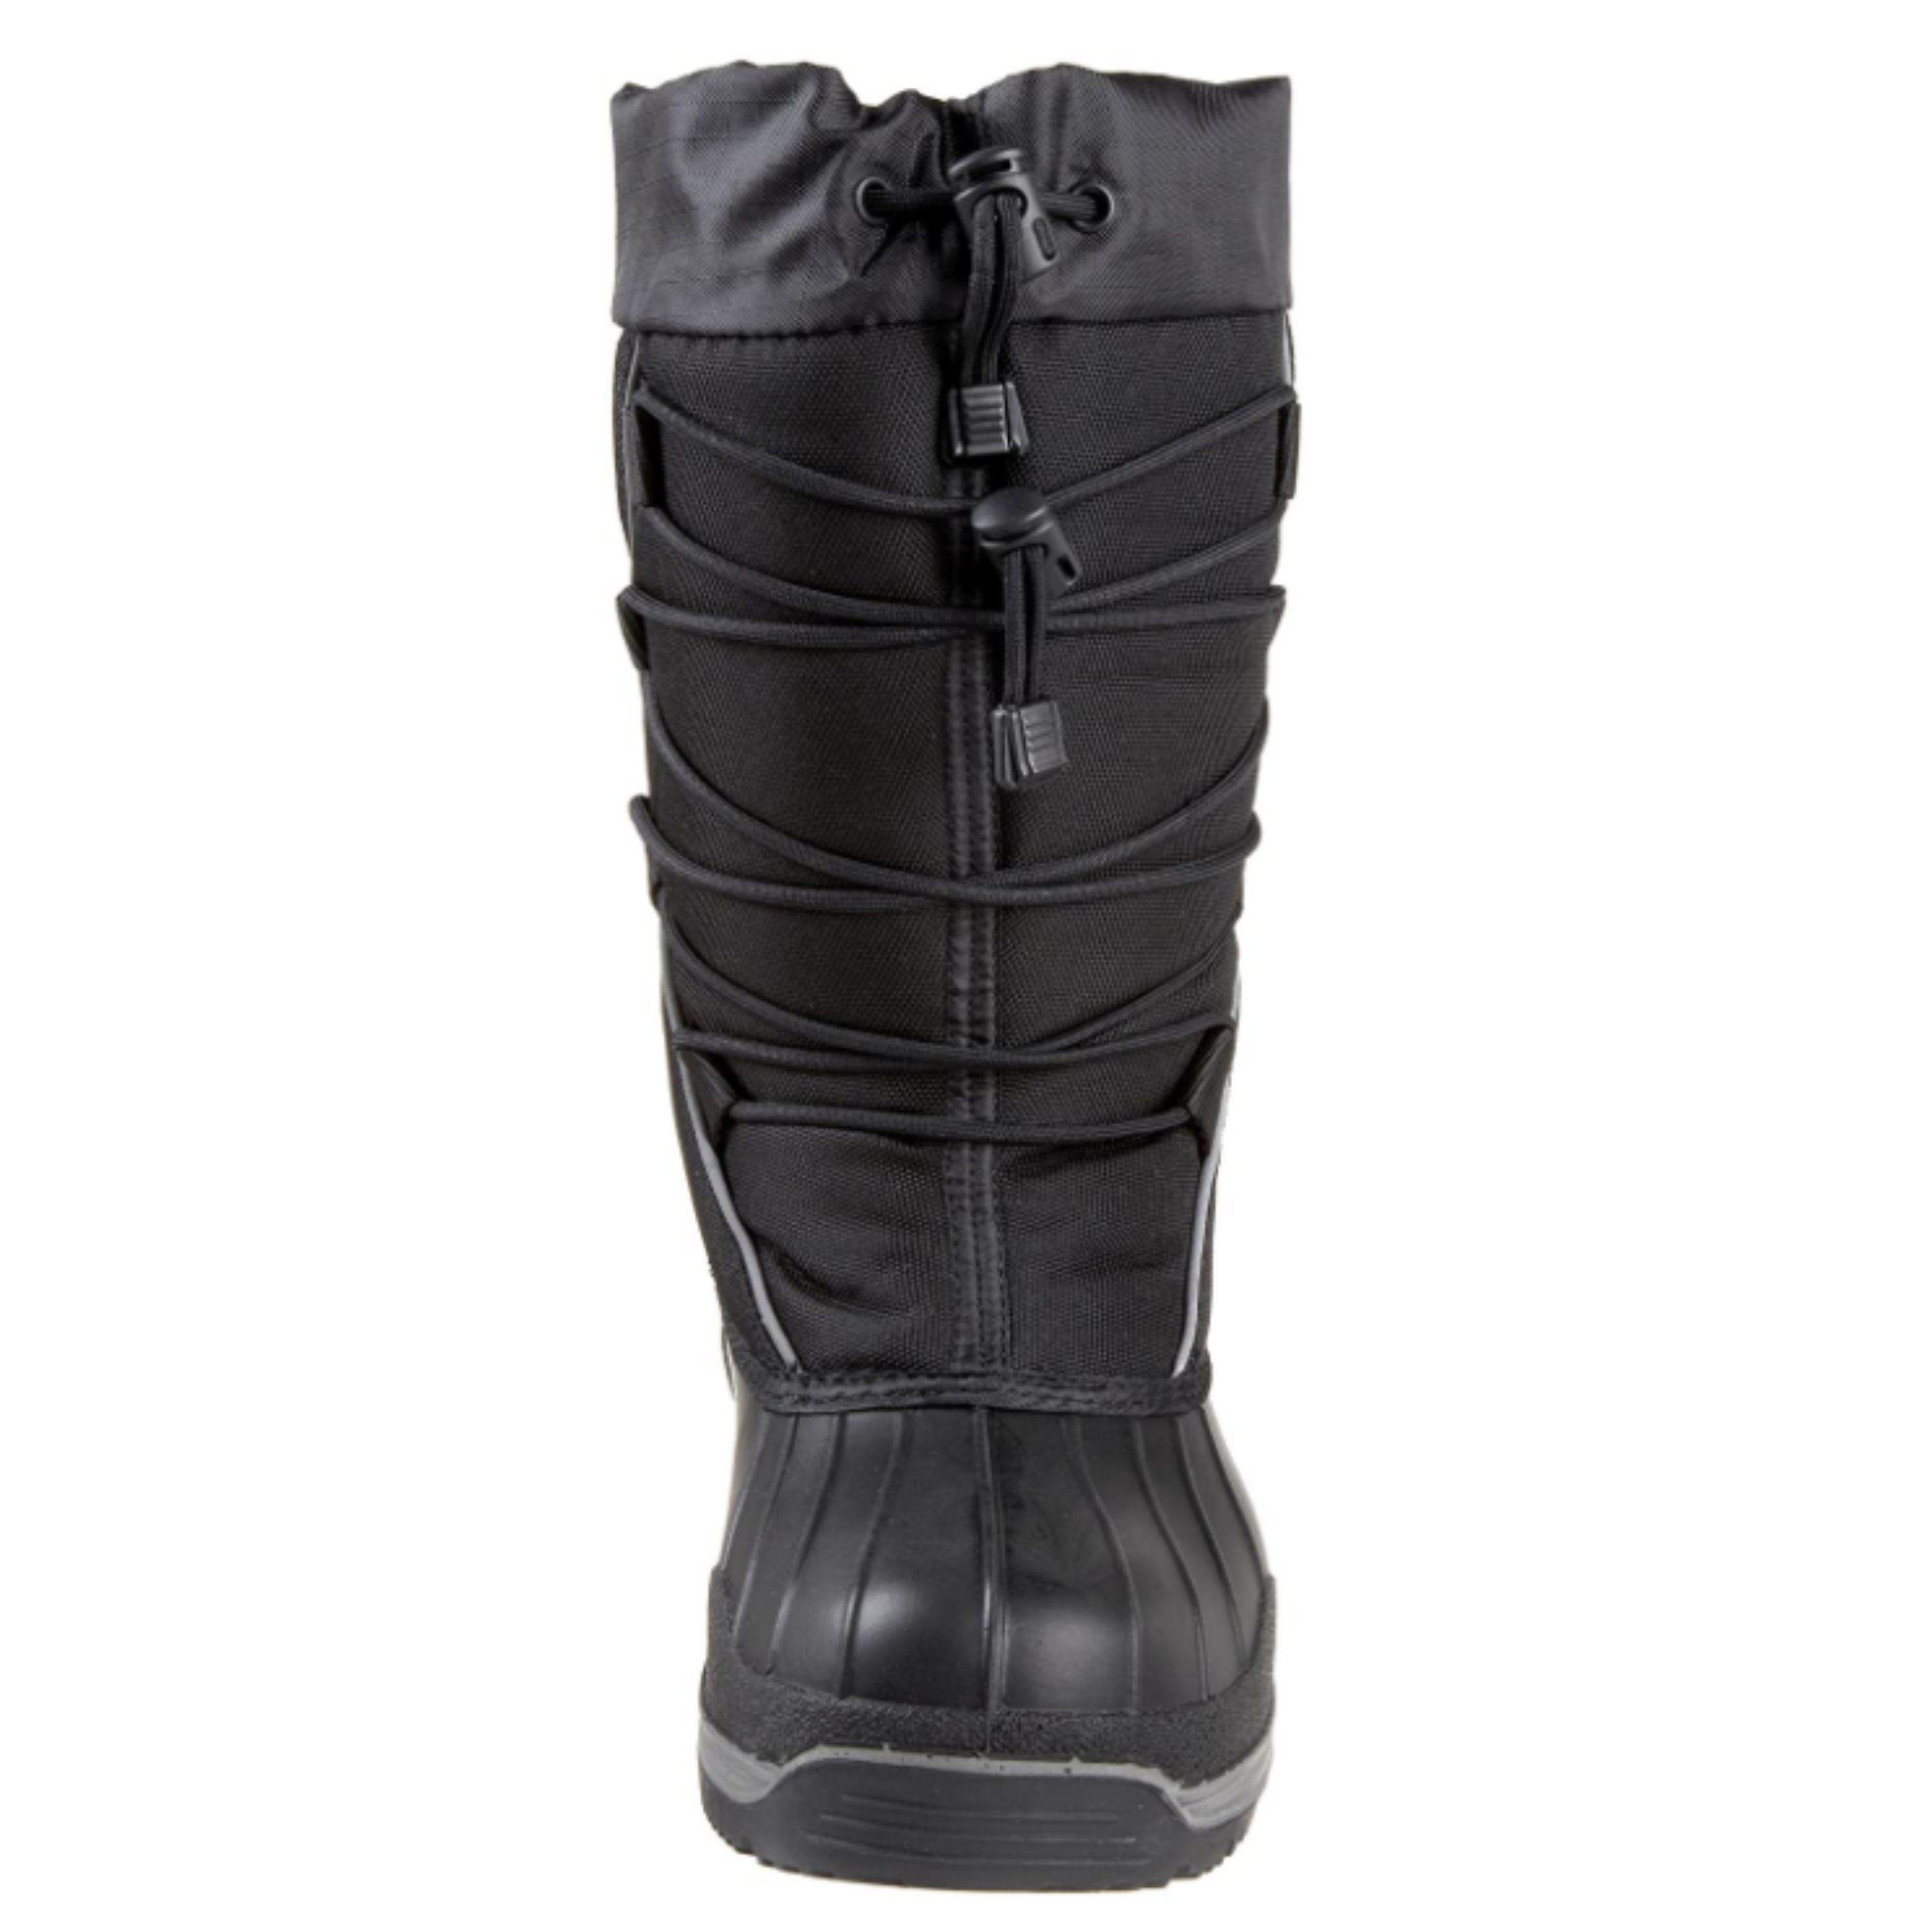 Bottes d'hiver "Icefield" - Femme